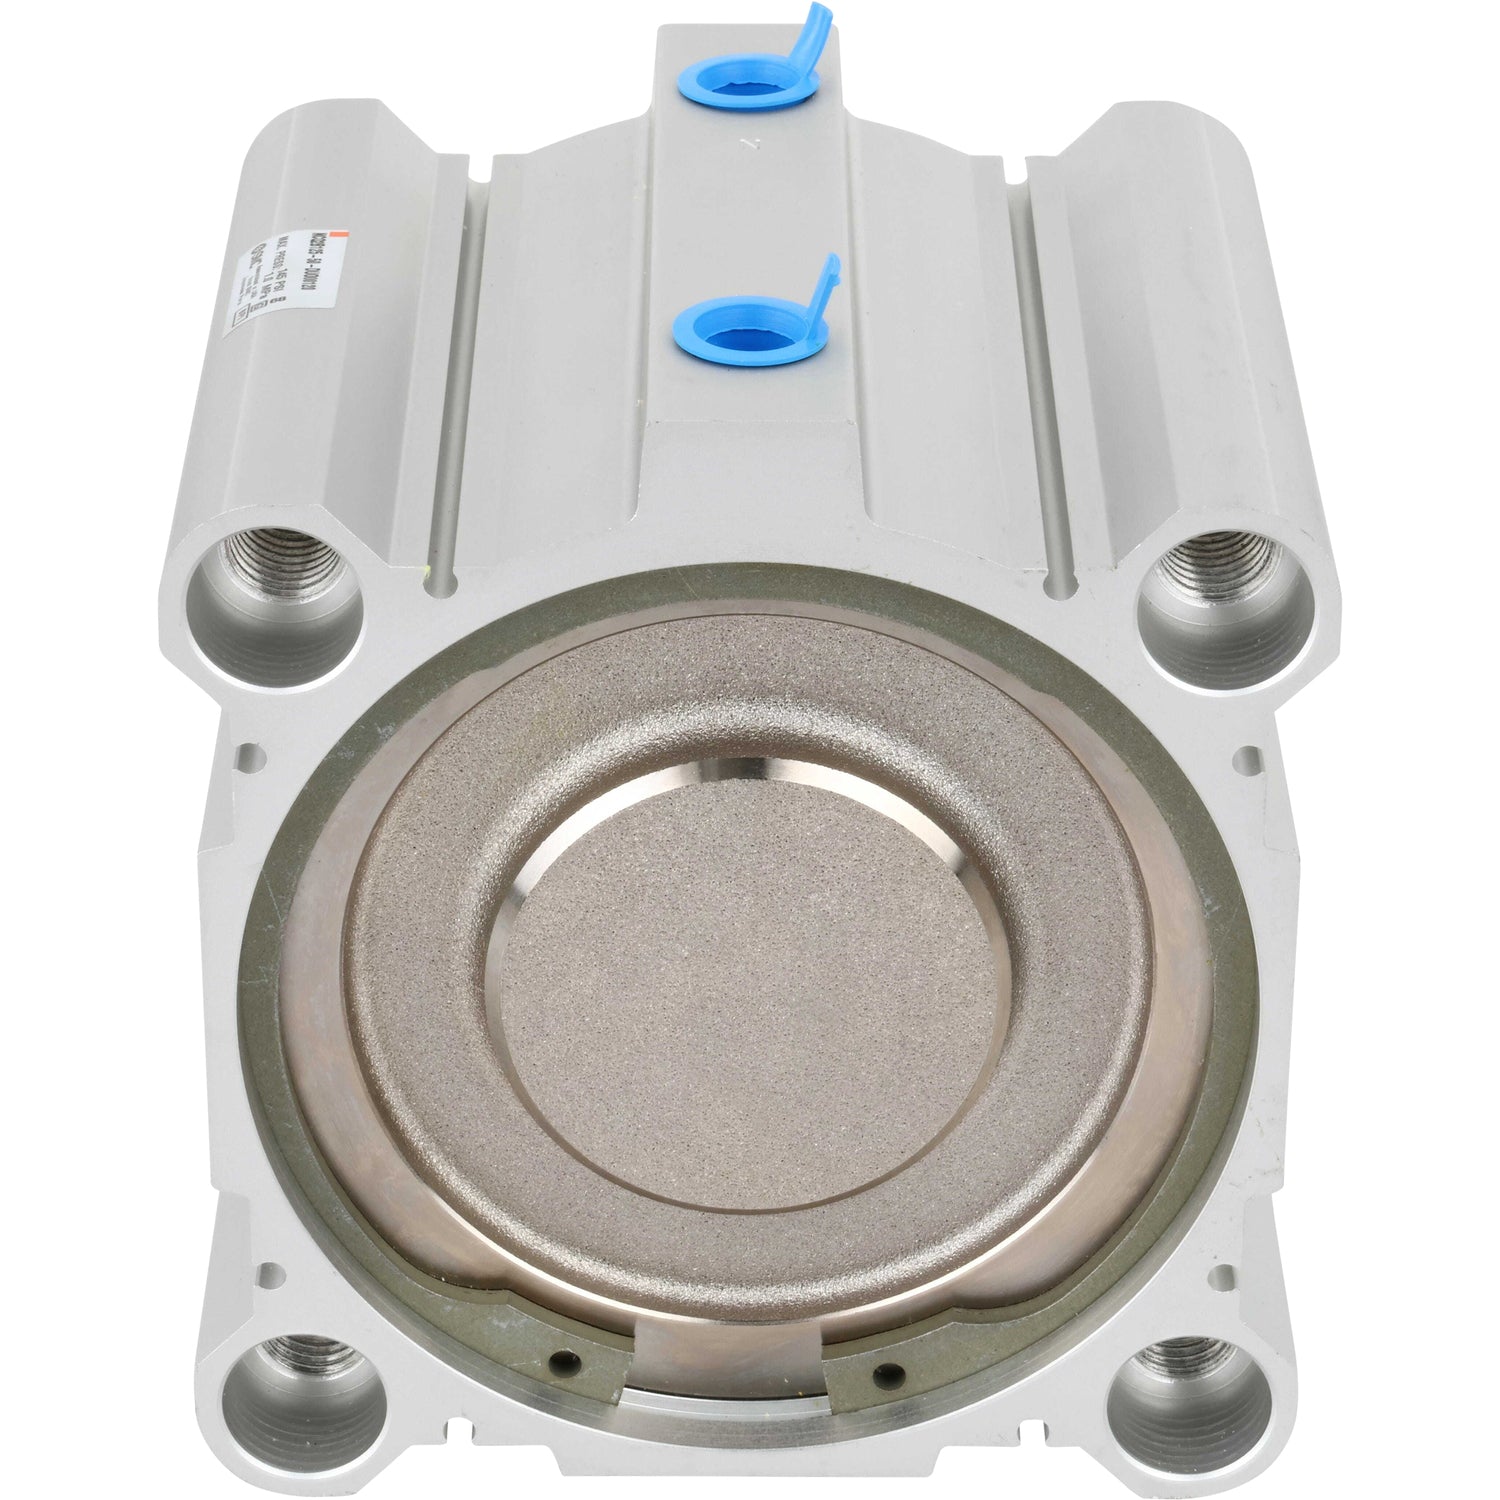 Square air cylinder with threaded holes on each corner and blue push caps on white background.